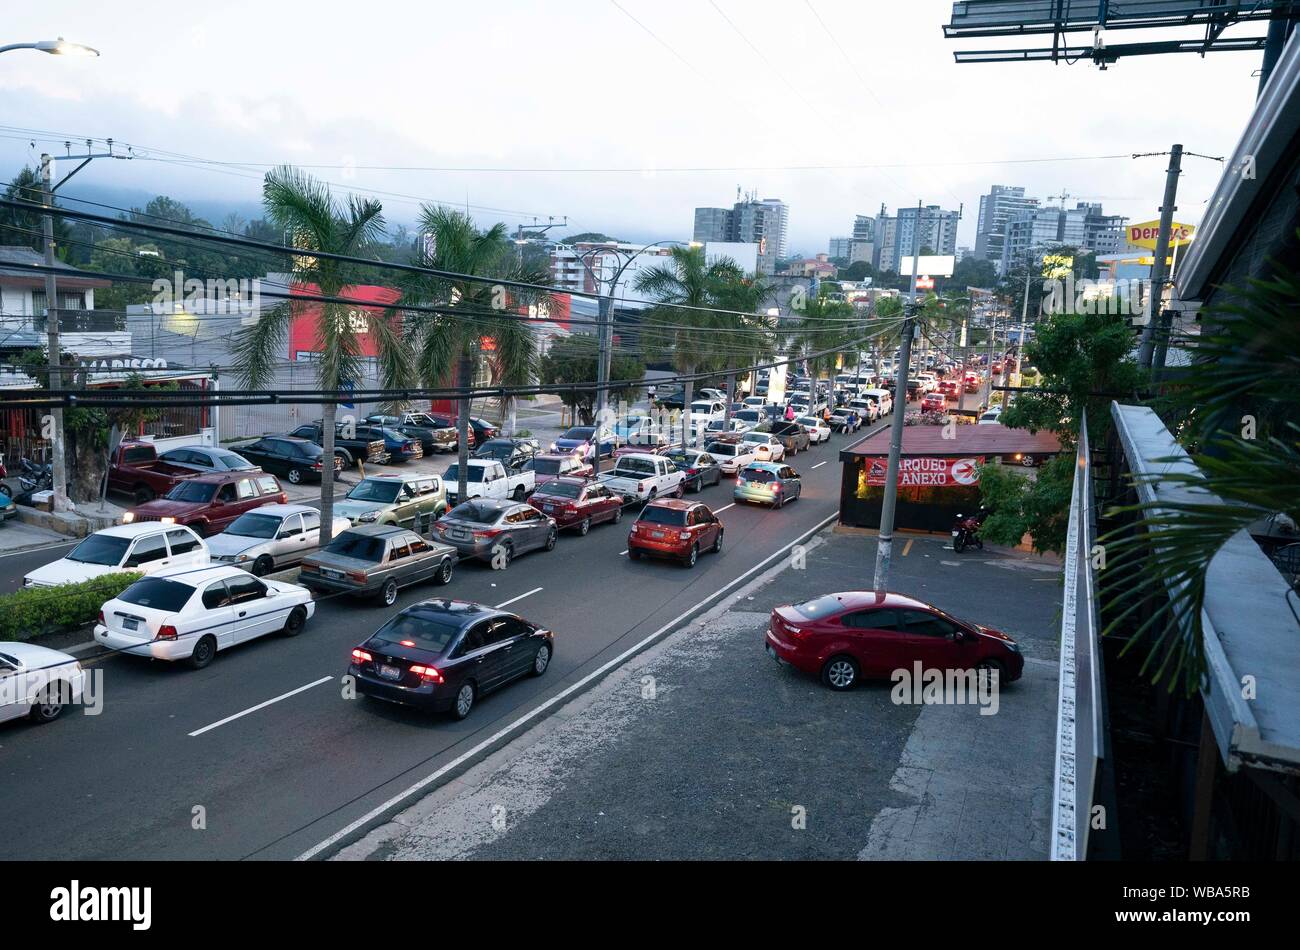 The busy street scene of La Zona Rosa in downtown San Salvador on the early evening of August 6, 2019. Stock Photo